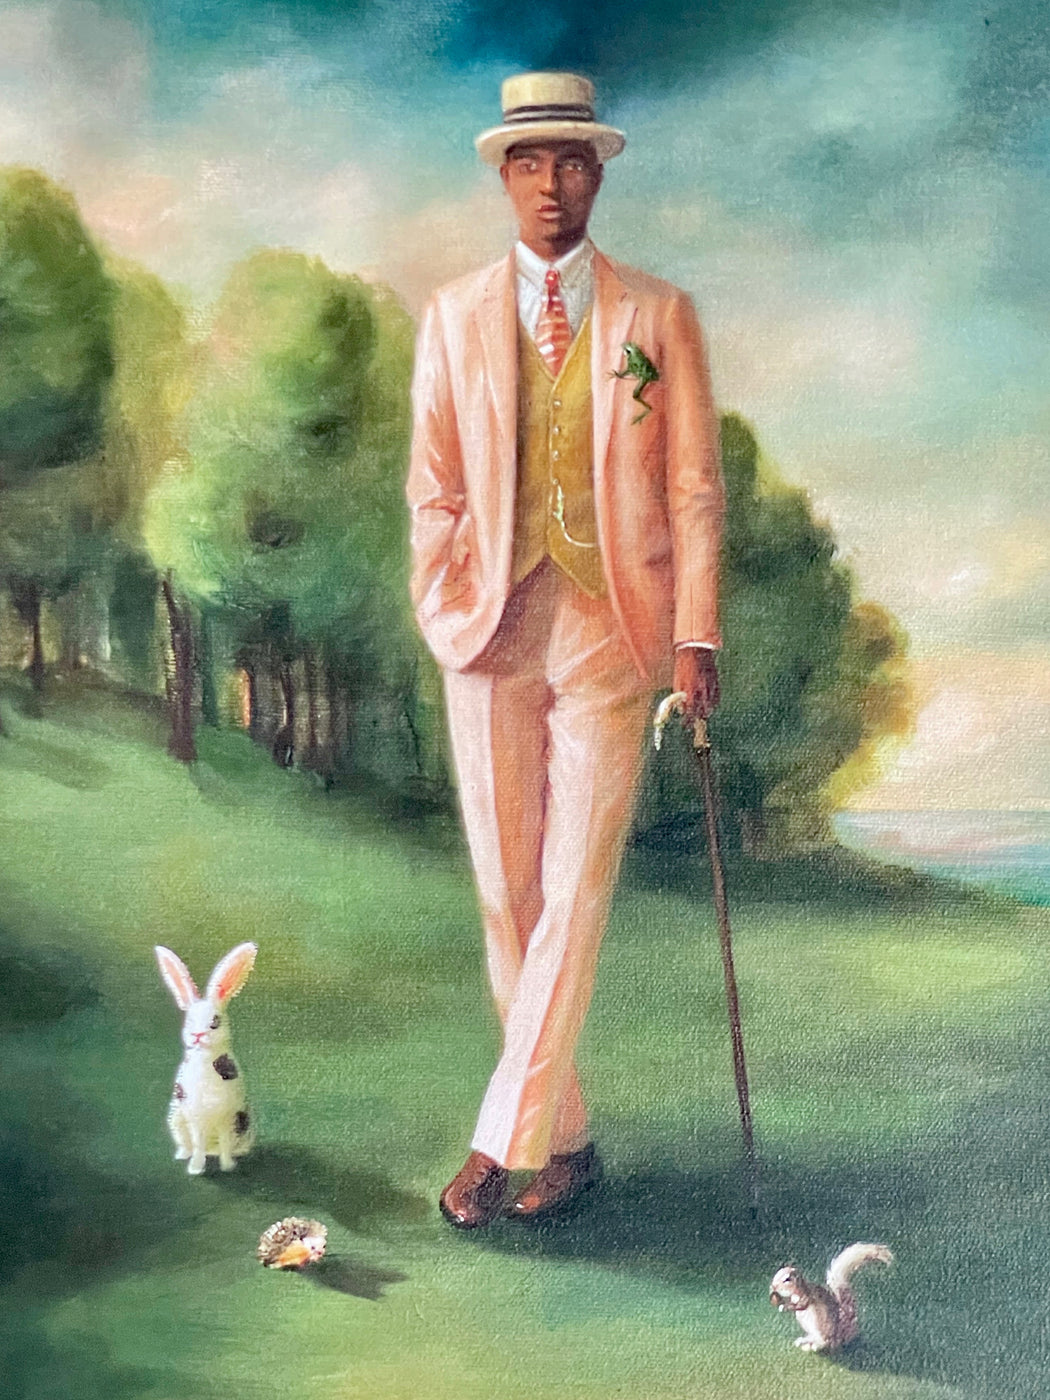 "Unapologetically William" by Janet Hill